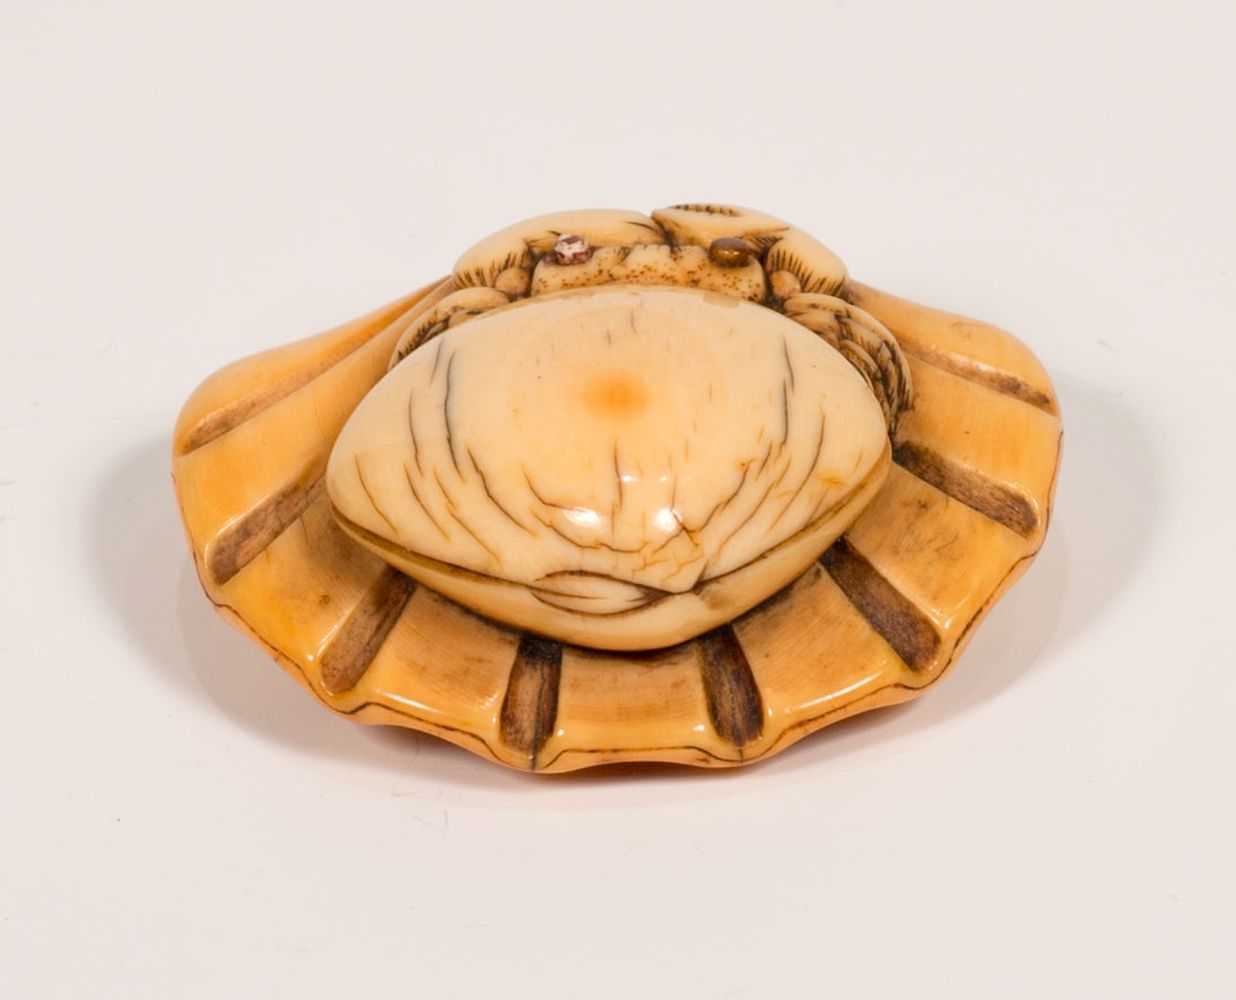 A JAPANESE EDO PERIOD CARVED IVORY NETSUKE OF CRAB & SHELLS, the crab upon the shell, the crabs eyes - Image 4 of 8